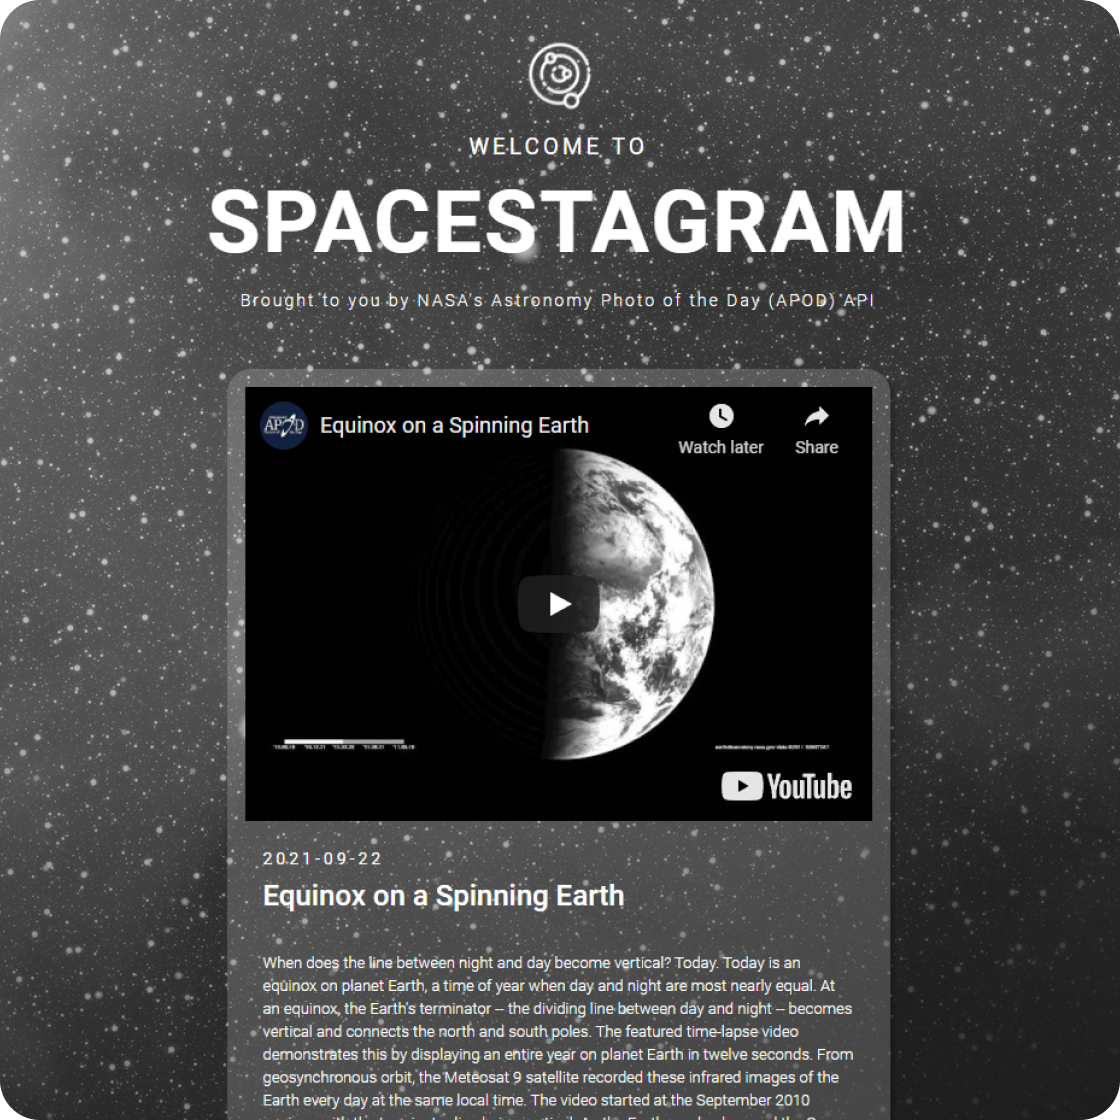 Spacestagram app that displays astronomy photos from NASA